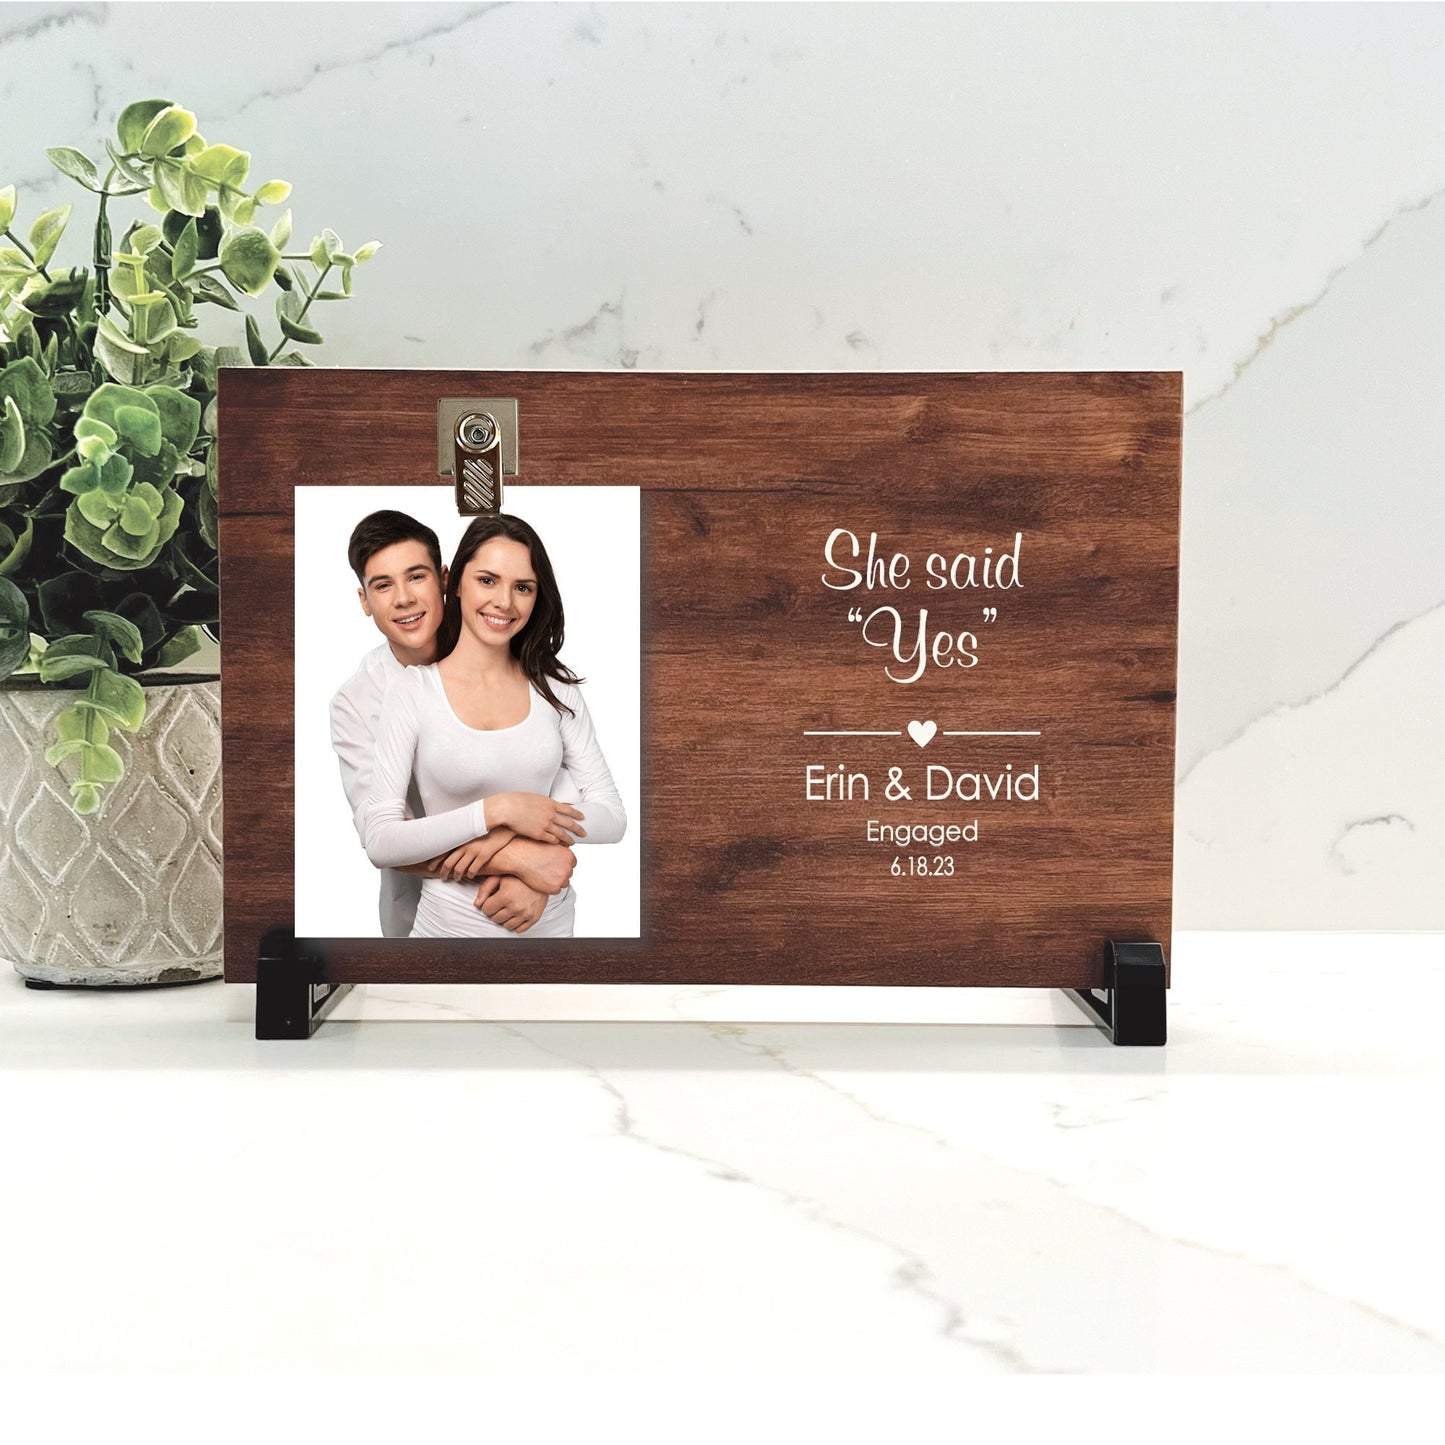 Engagement Frame, She said YES, Engagement Gift, Gift Ideas for Engaged Couples, Personalized Wood Engagement Frame - background choice